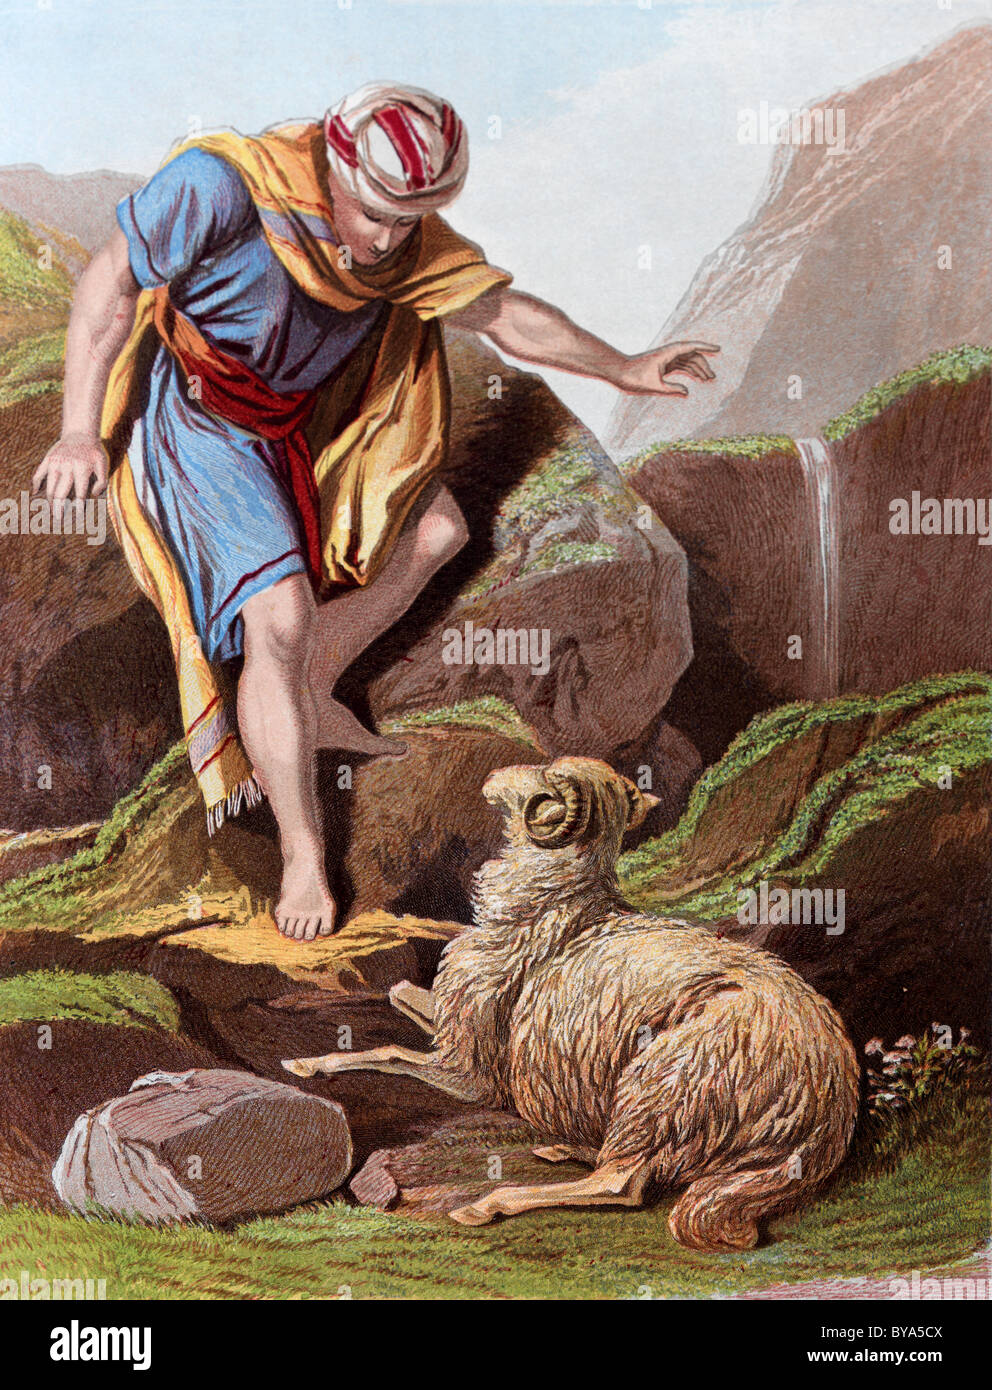 bible stories illustration of the shepherd finding the lost sheep bya5cx